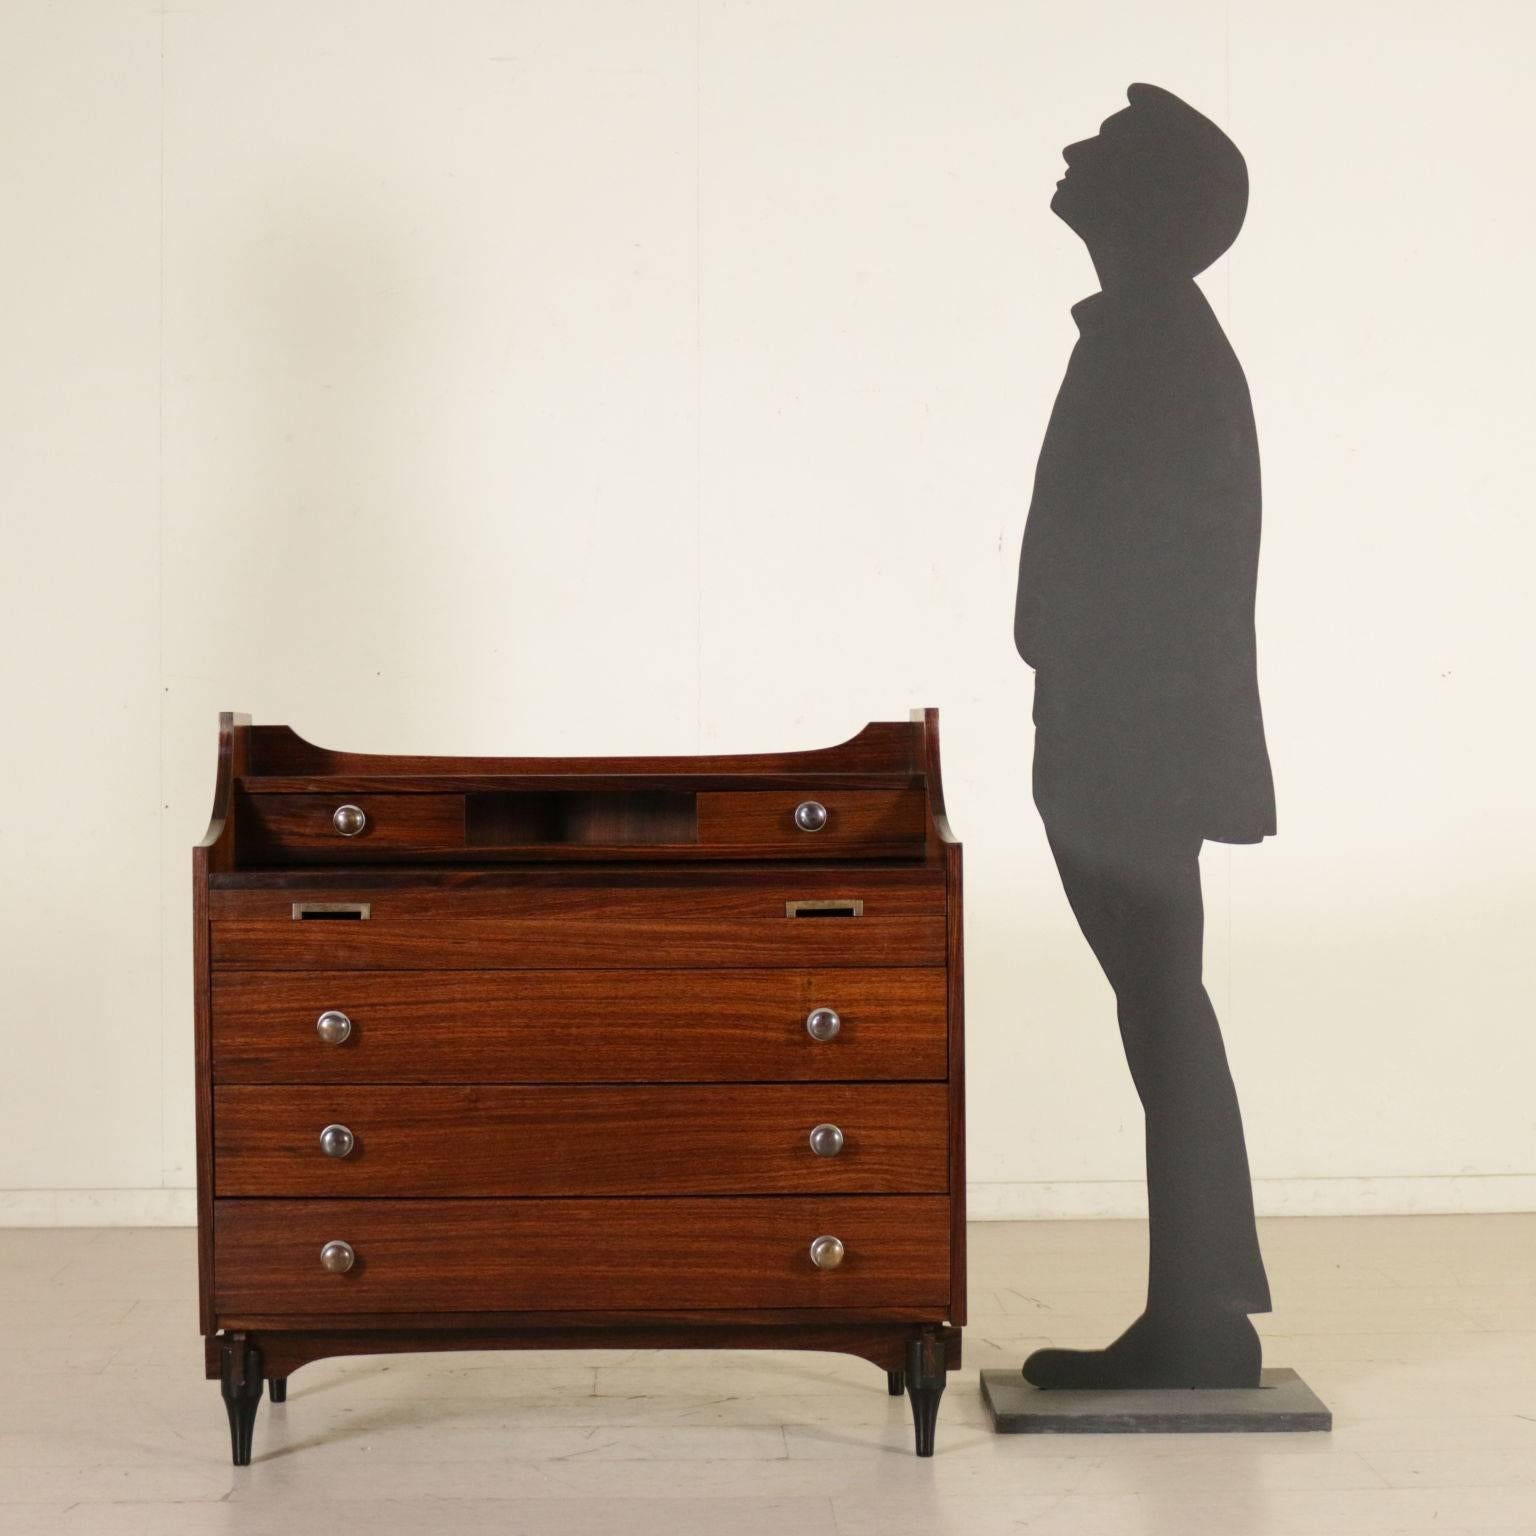 A chest of drawers convertible in a dressing table with extractable top and a drop-leaf. Designed by Claudio Salocchi for Sormani, model: SC 284. Rosewood veneer, manufactured in Italy, 1960s.